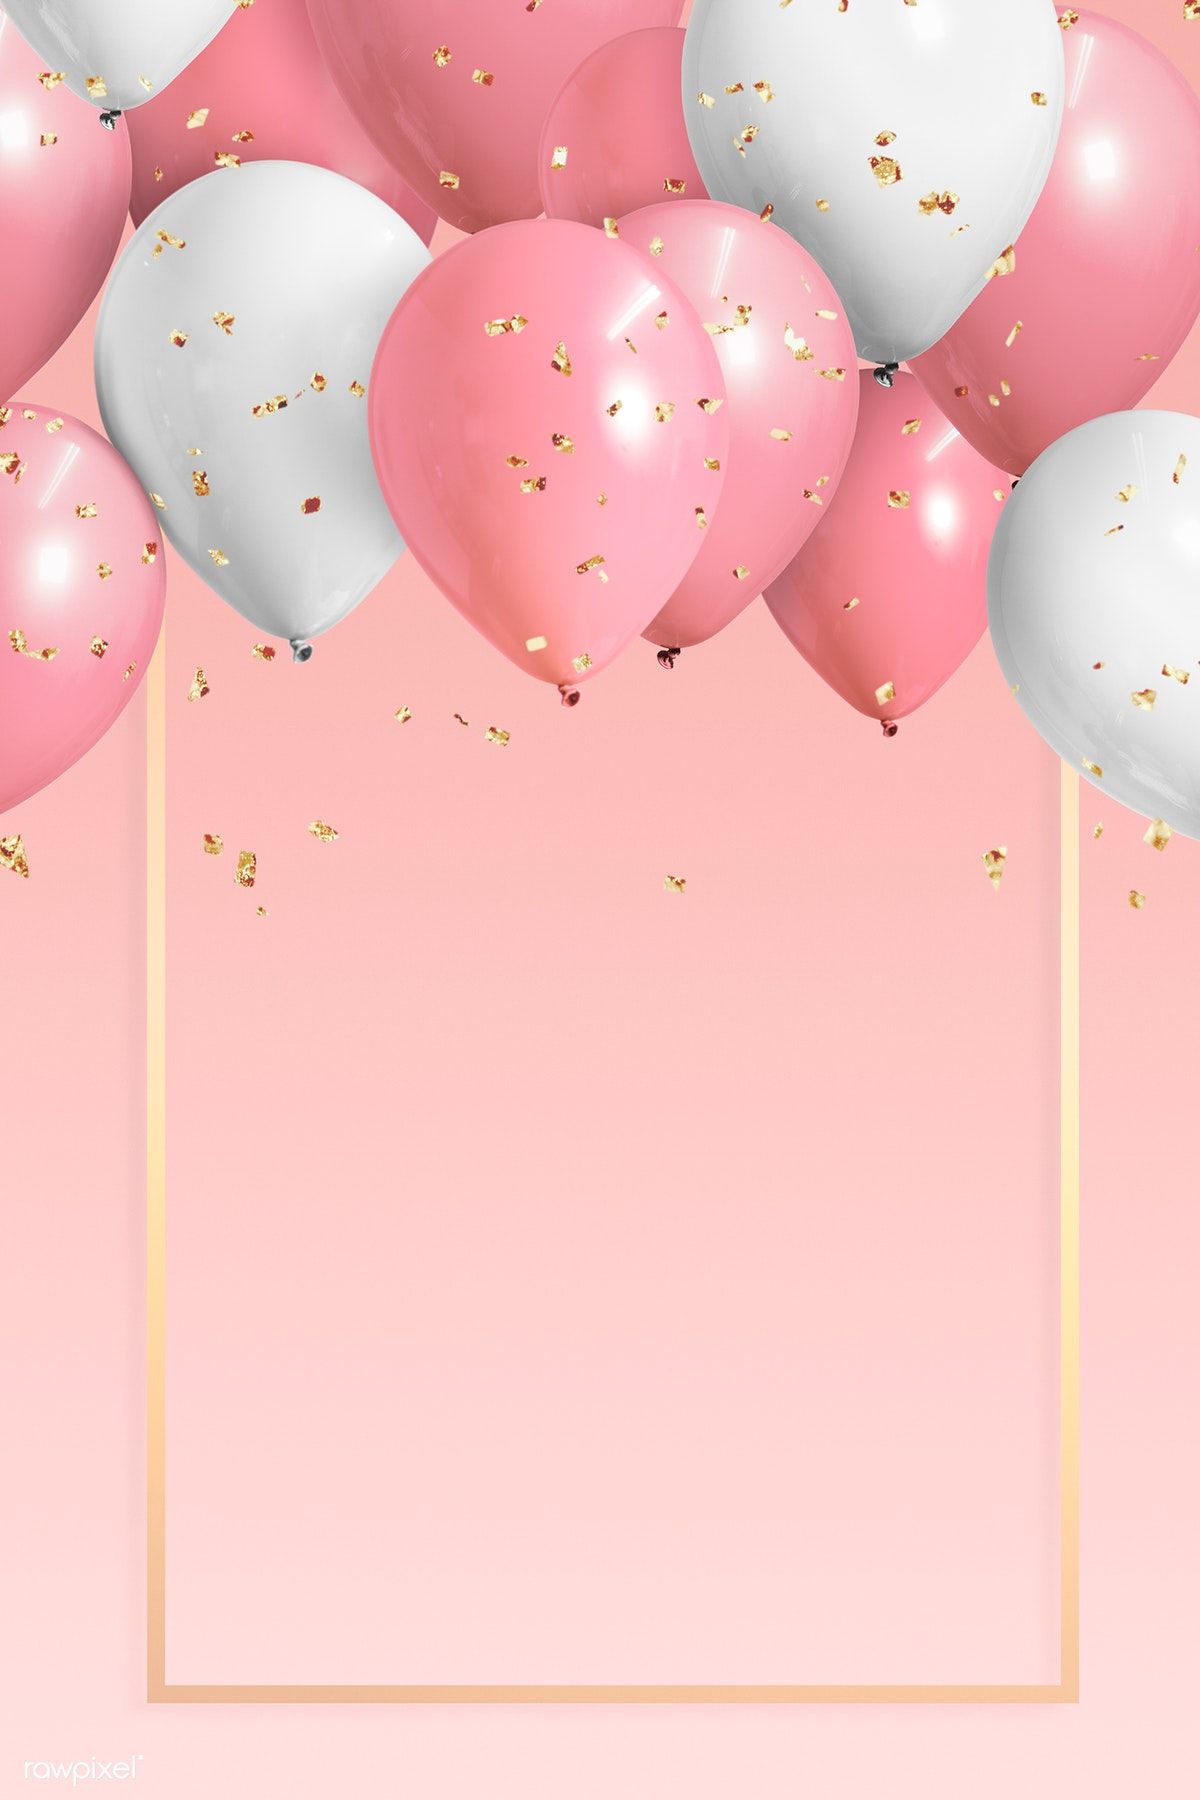 Download premium illustration of Golden frame balloons on a pink. Pink wallpaper iphone, Pink background, Birthday wallpaper